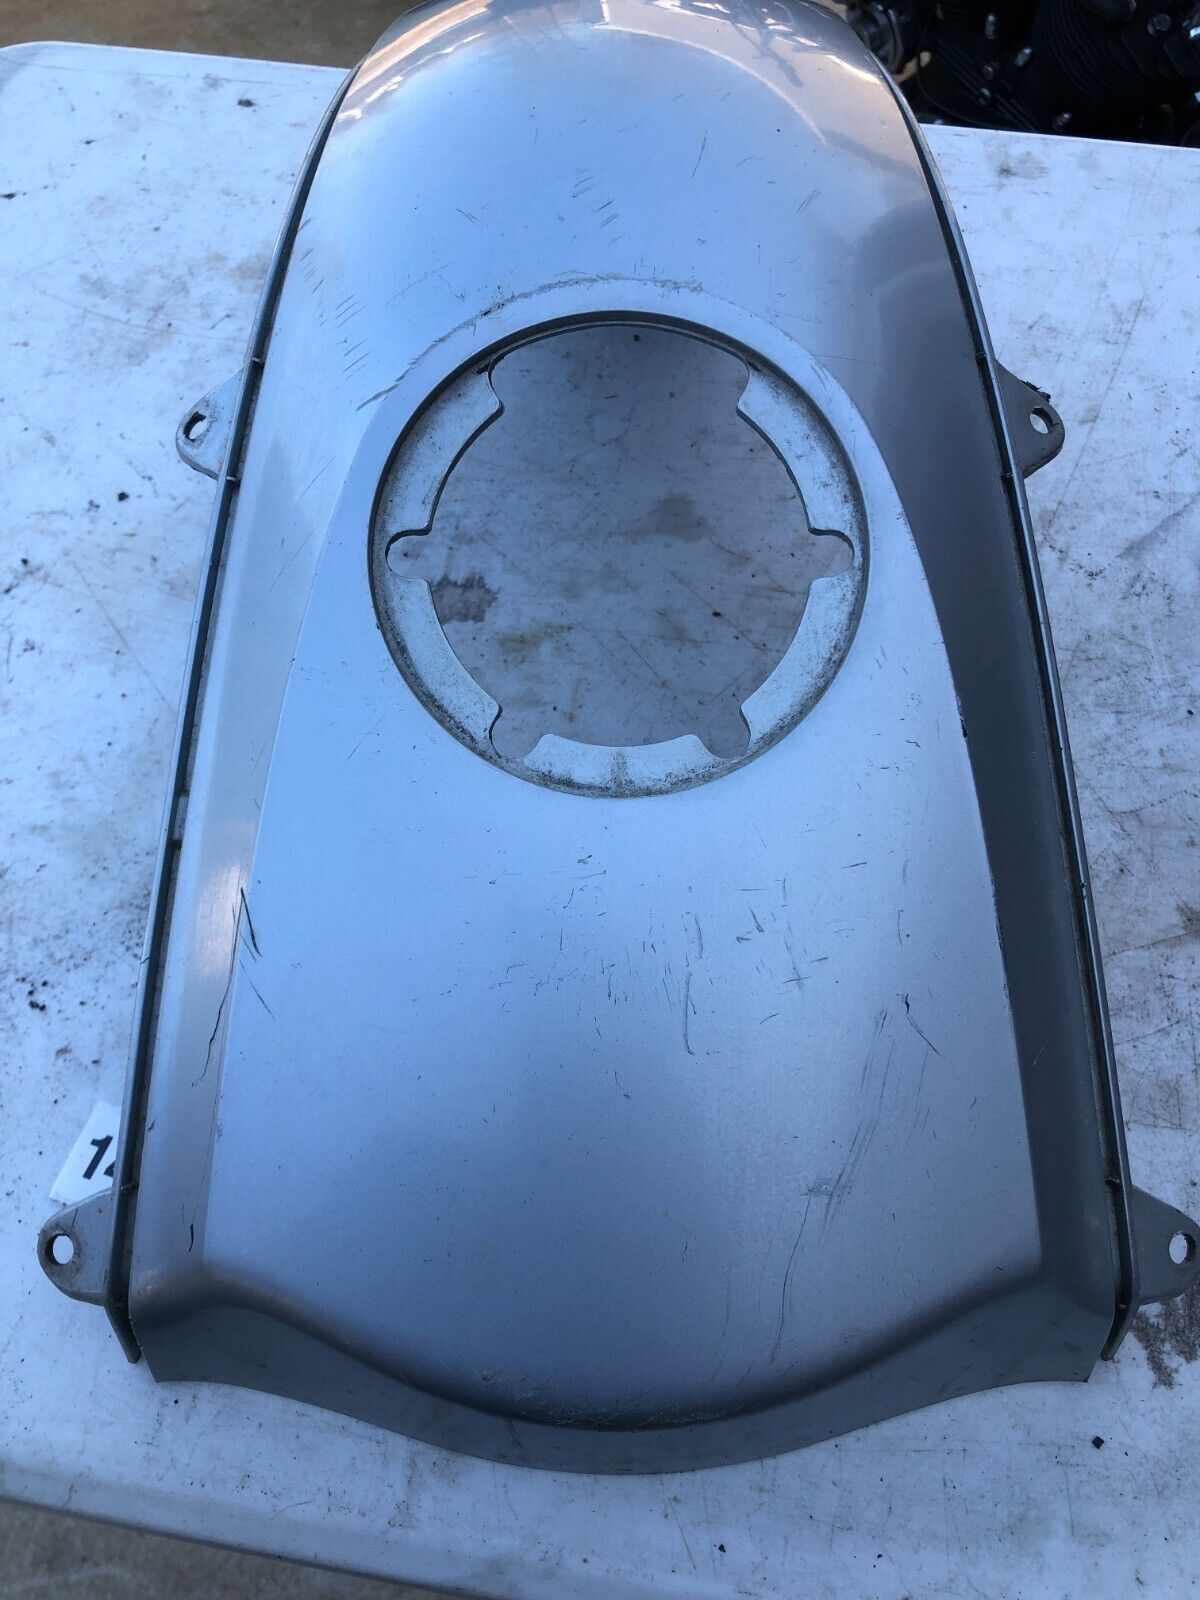 2000 00 POLICE BMW R1150RT R1150 RT ABS FUEL GAS TANK COVER COVERING TOP